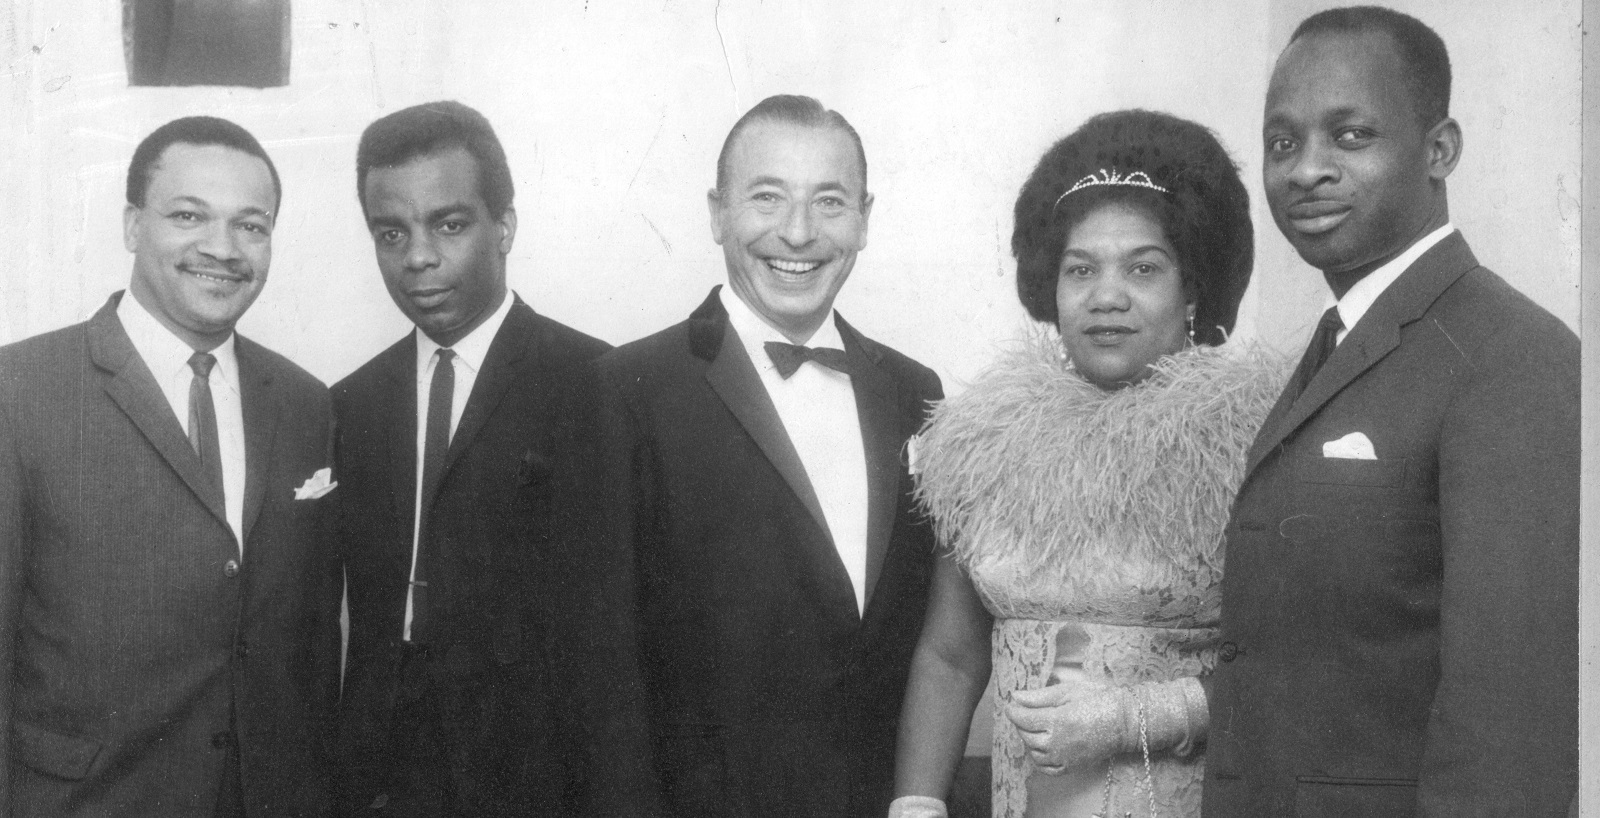 Photo by Harry Jacobs from Lambeth Archives: Brixton hairdressing awards ceremony in 1965 with bandleader Joe Loss (centre)